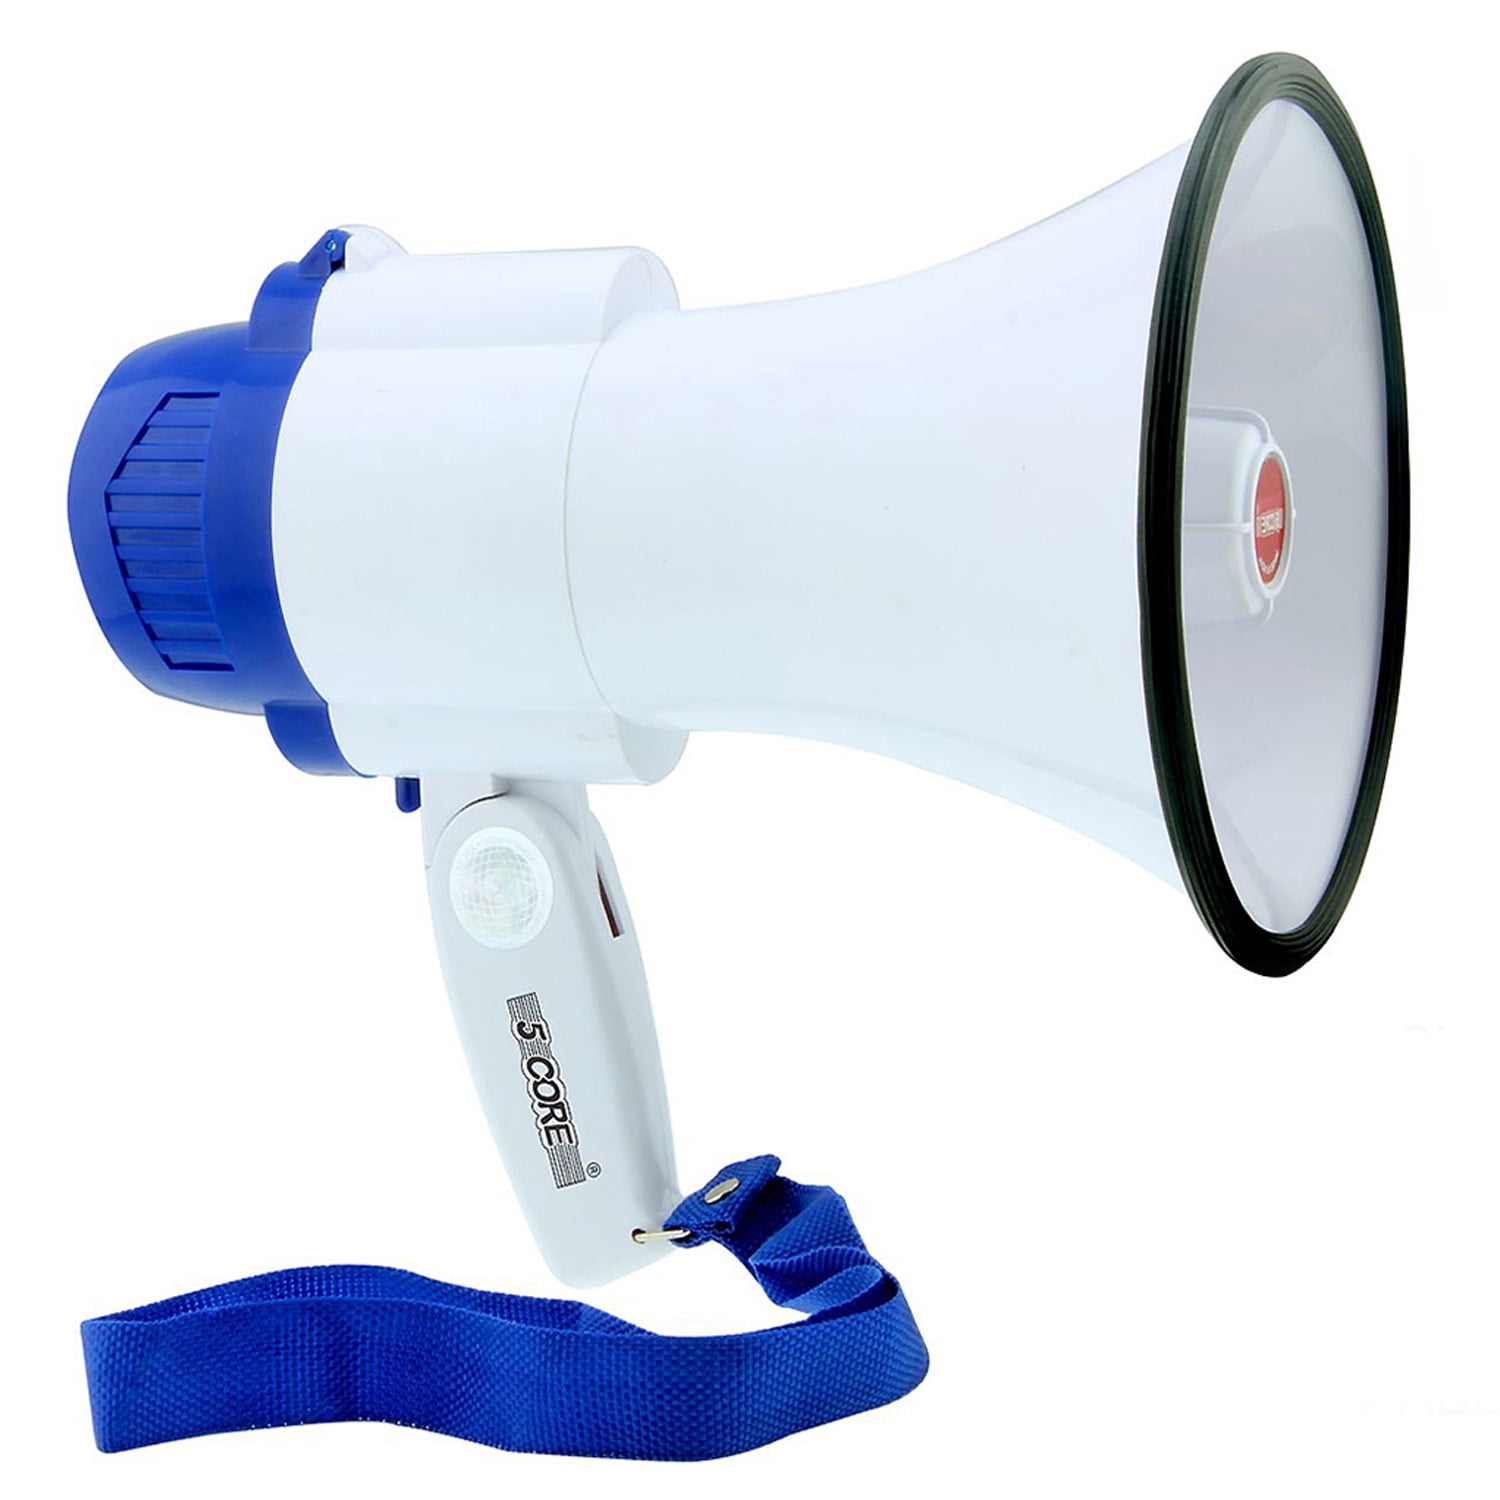 1 Pcs Portable Professional Megaphone Microphone Air Horns Super Loud Durable Plastic Megaphone Speaker Bullhorn with Siren for People to Hear Your Voice Use Recording Music 